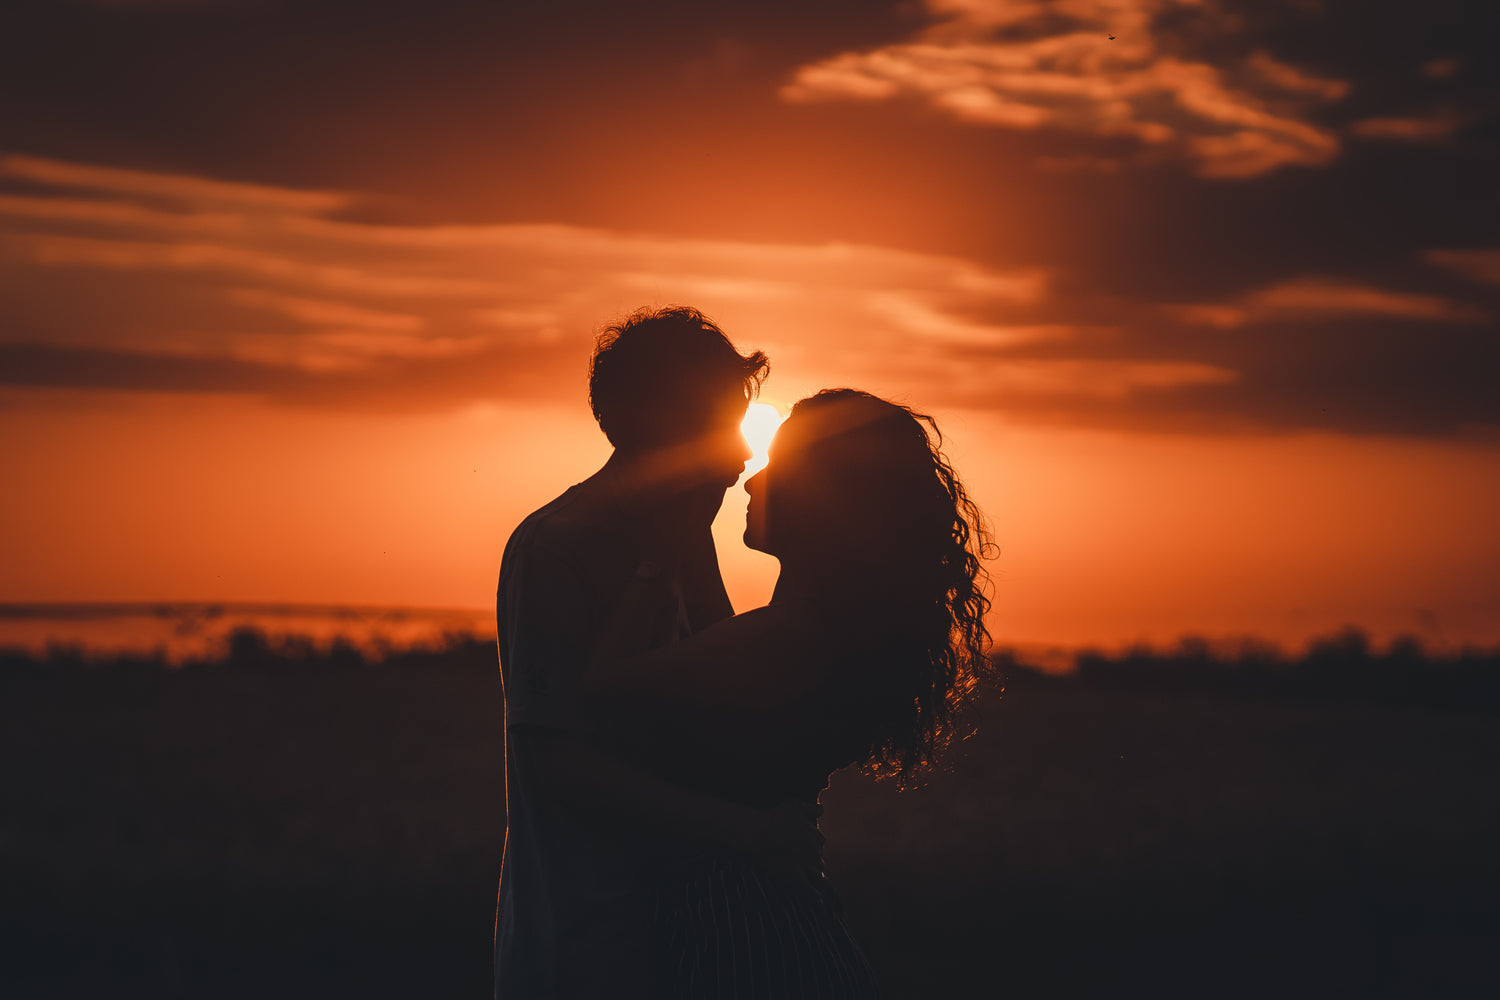 Photo by Gabriel Bastelli: https://www.pexels.com/photo/silhouette-photography-of-man-and-woman-1759823/